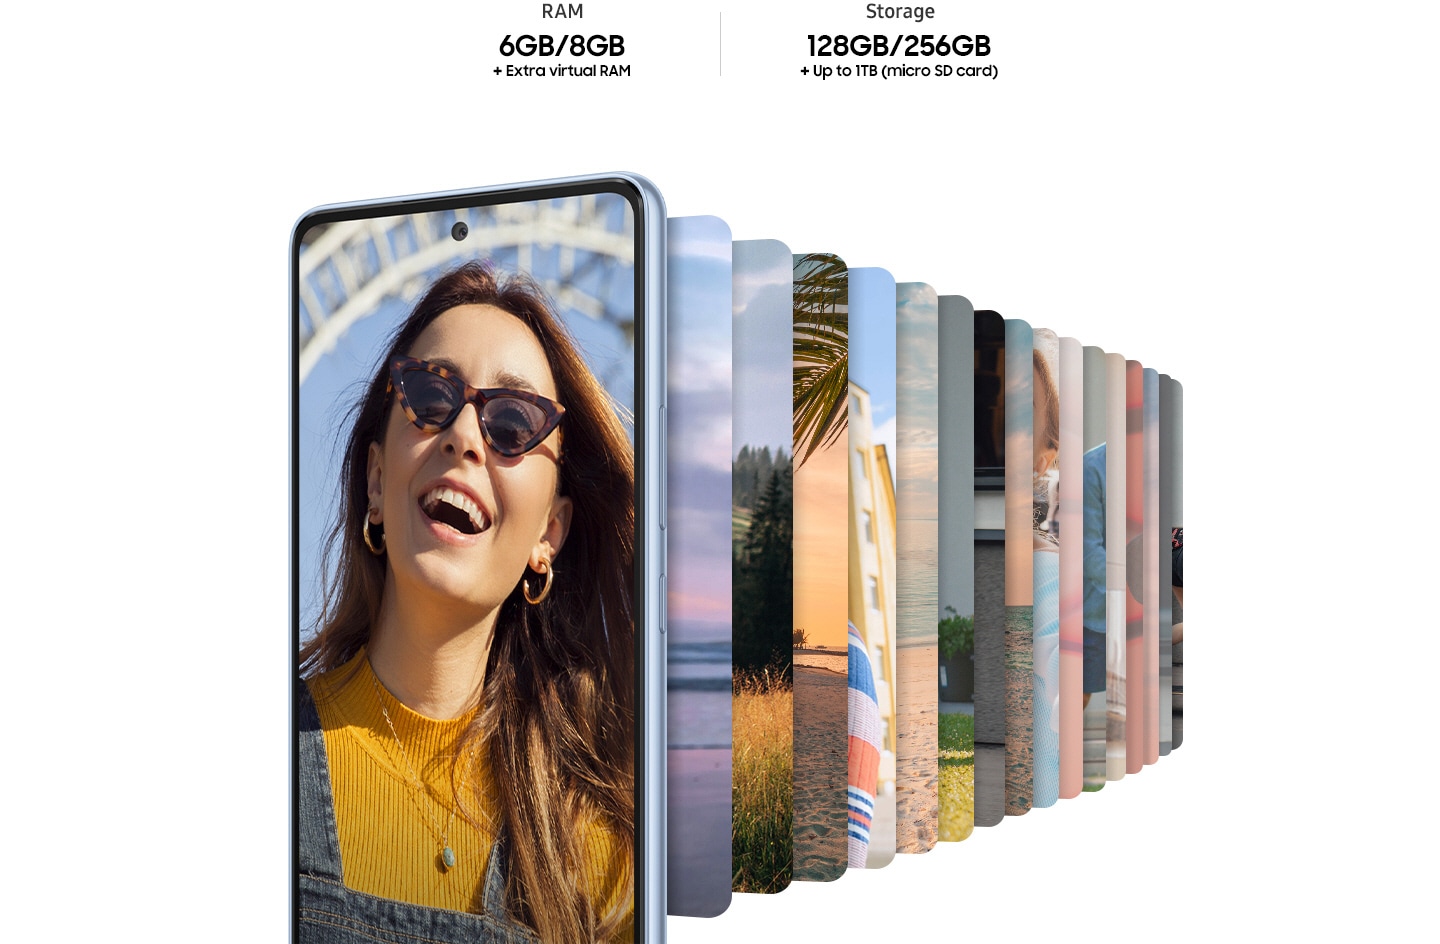 Galaxy A53 5G seen from the front, displaying an image of a woman in sunglasses, smiling. Behind the smartphone are numerous pictures in the smartphone shape, lined up and showing various landscape environments. Text reads RAM 6GB +Extra virtual RAM and Storage 128GB +Up to 1TB (Micro SD card).